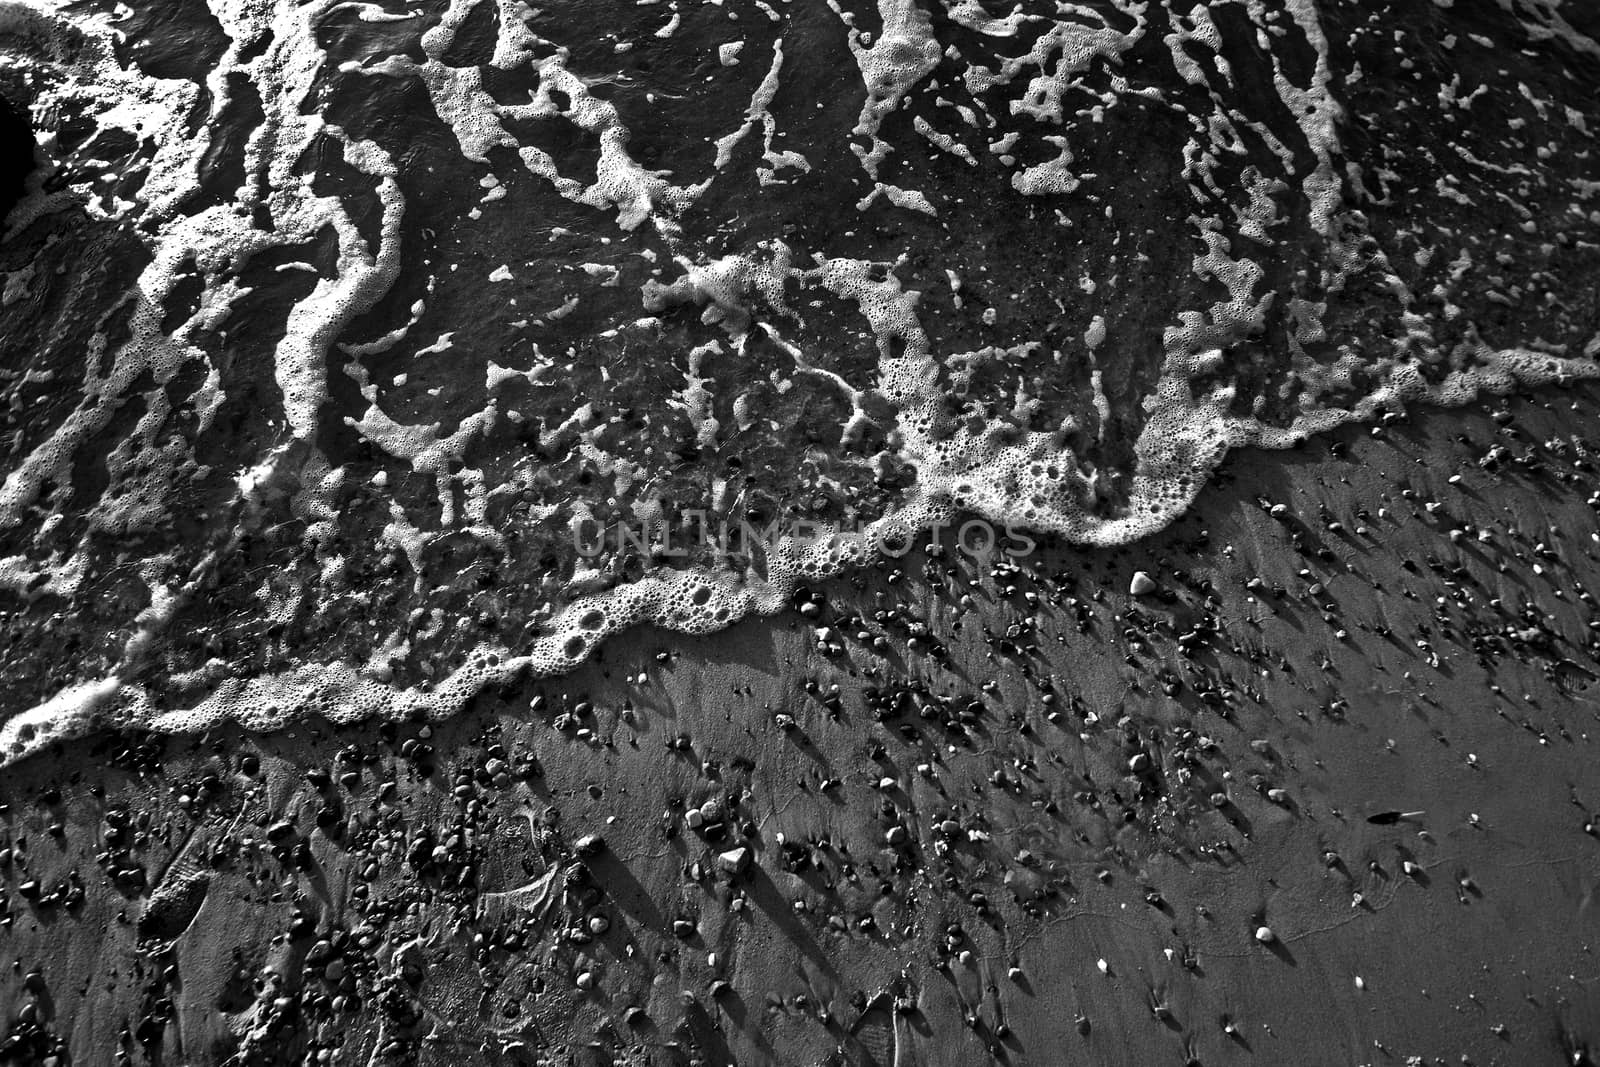 Sea ocean waves in black and white colors.